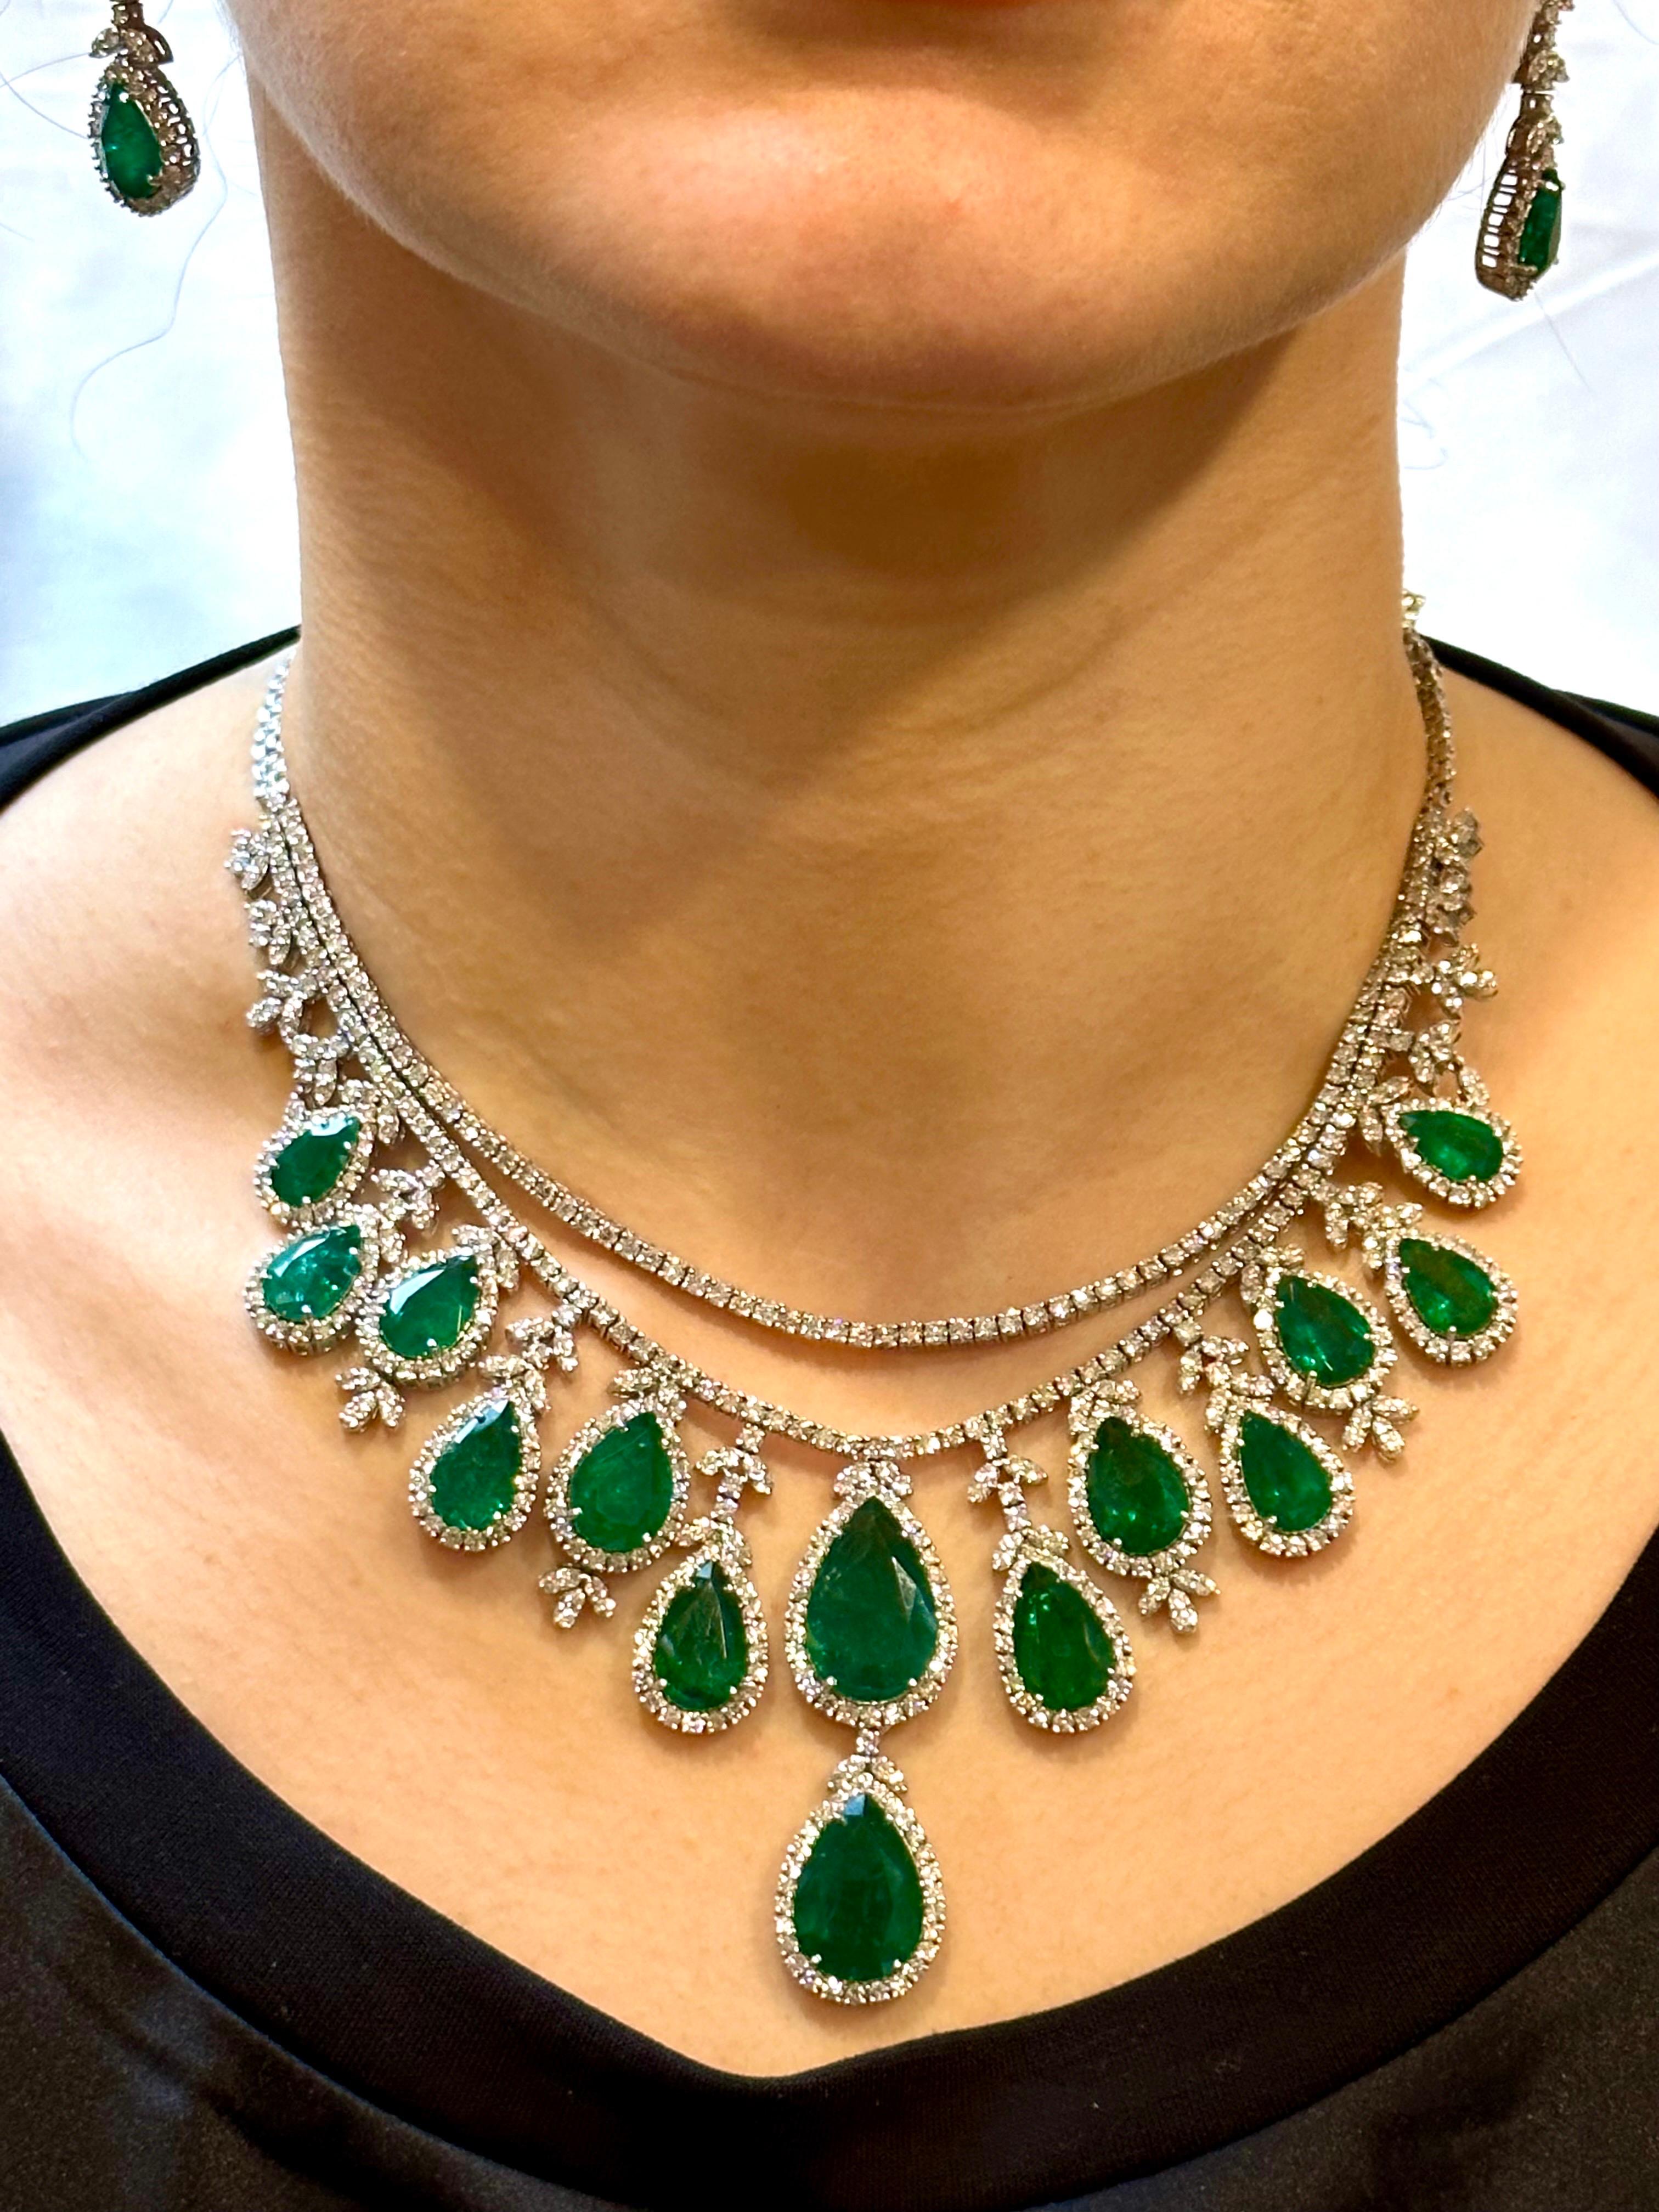 75 Ct Zambian Emerald and 30 Ct Diamond Necklace and Earring Bridal Suite For Sale 9